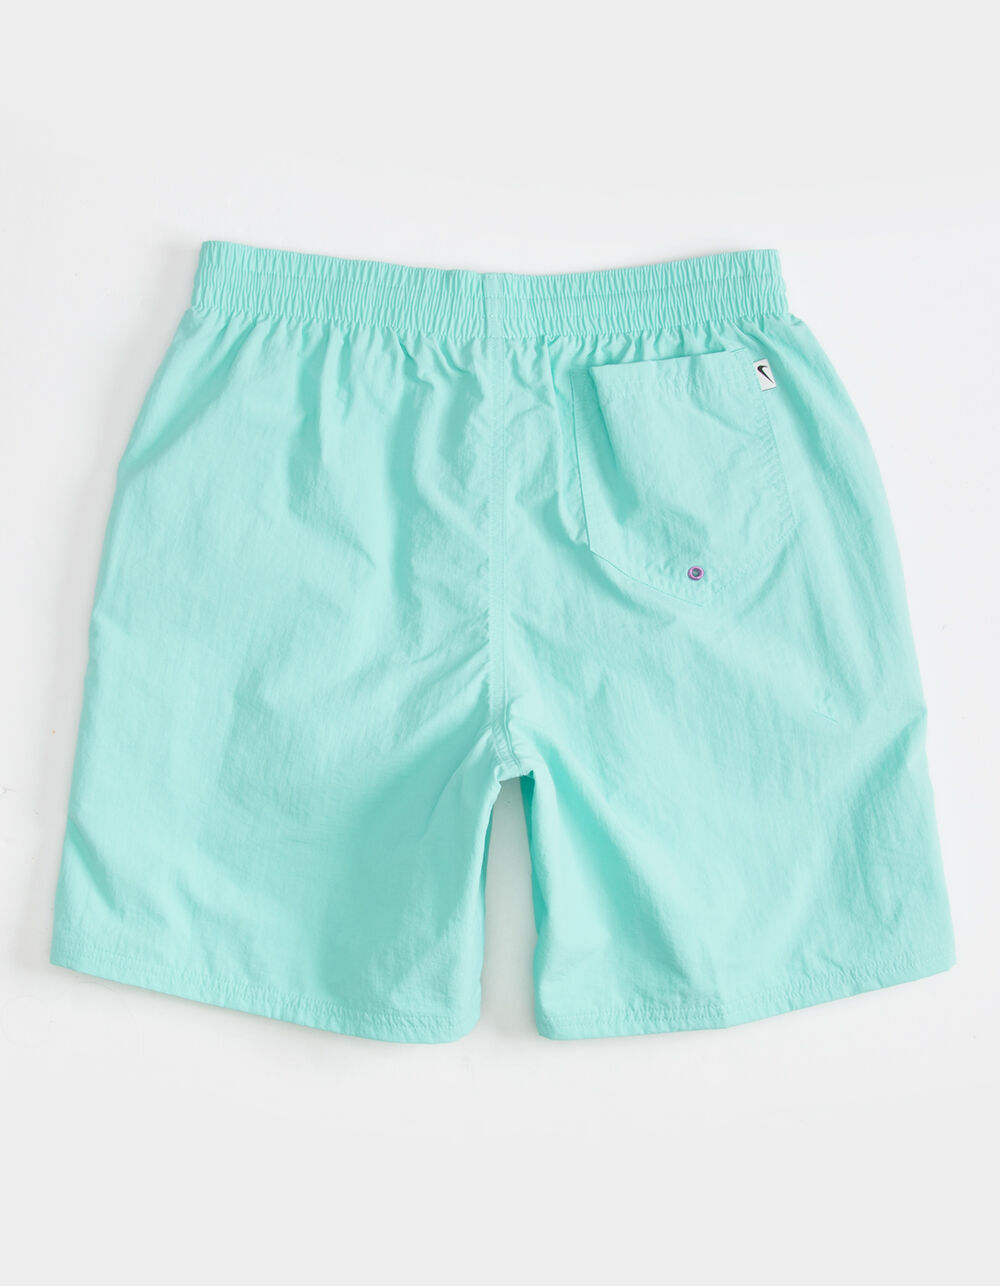 NIKE Icon Solid Mens Mint Volley Shorts - MINT | Tillys